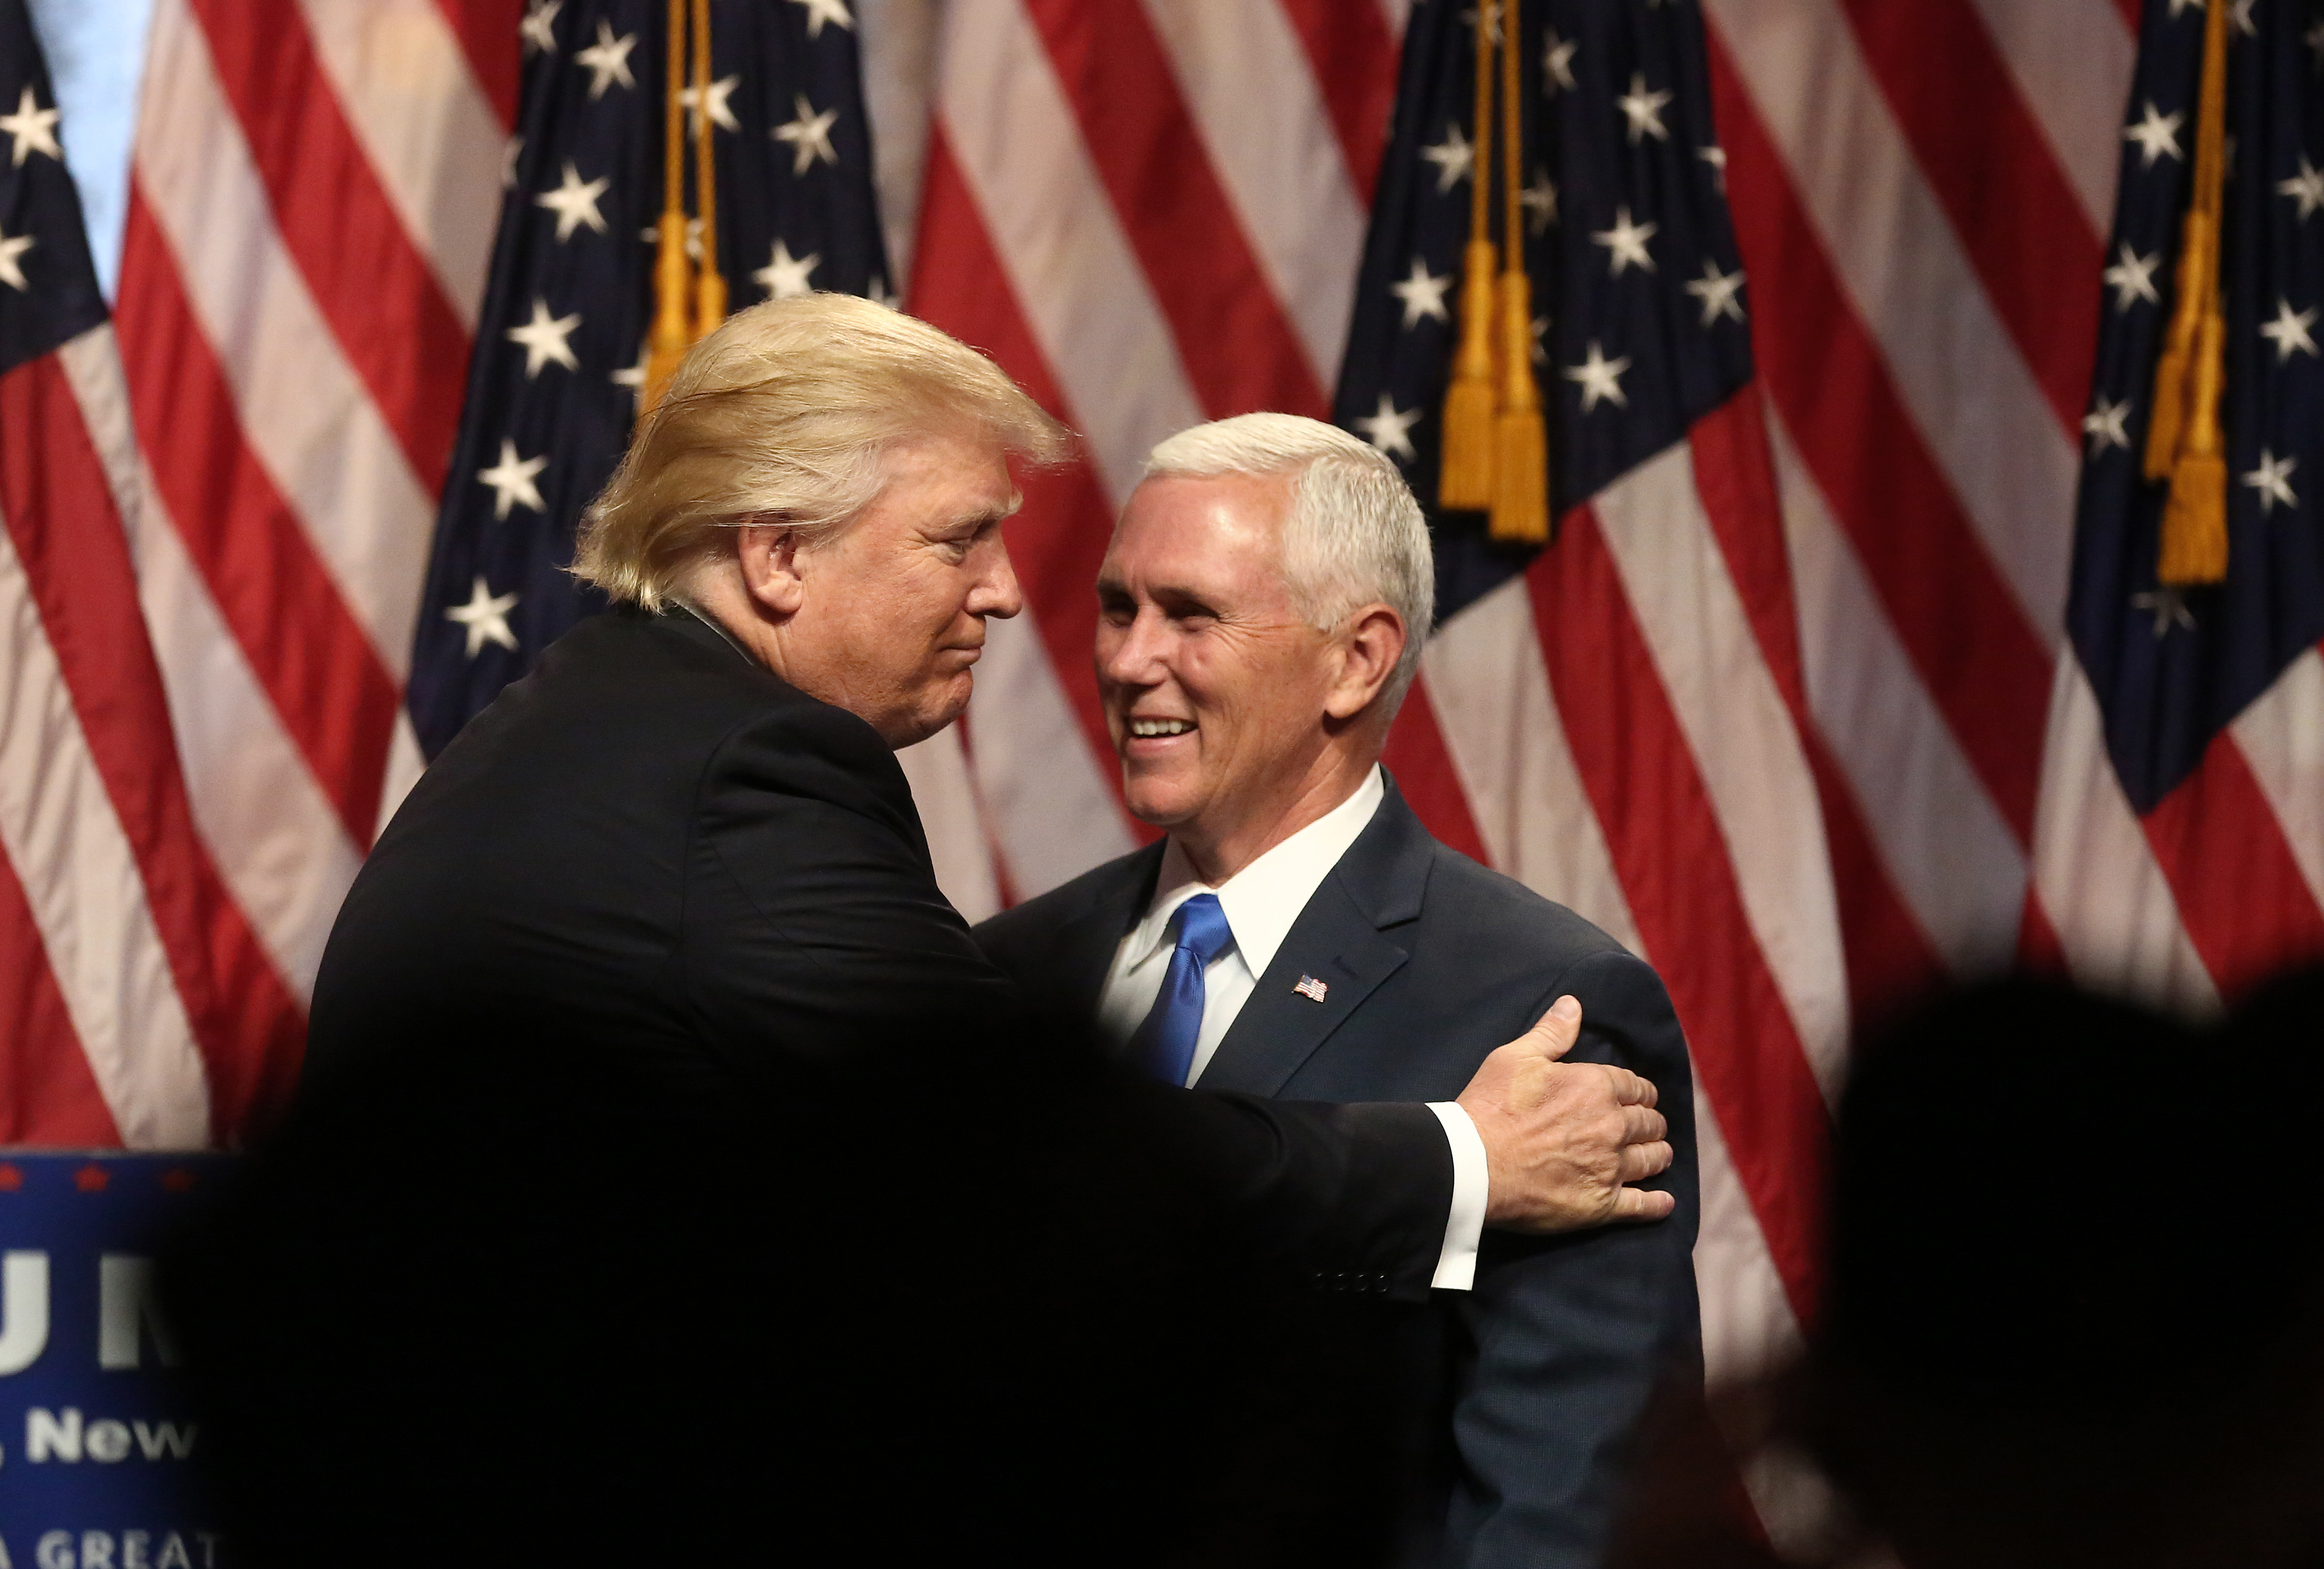 Donald Trump, presumptive Republican presidential nominee, greets Mike Pence, governor of Indiana and presumptive Republican vice presidential nominee, on stage during a campaign event in New York City, on July 16, 2016. (Bloomberg—Getty Images)